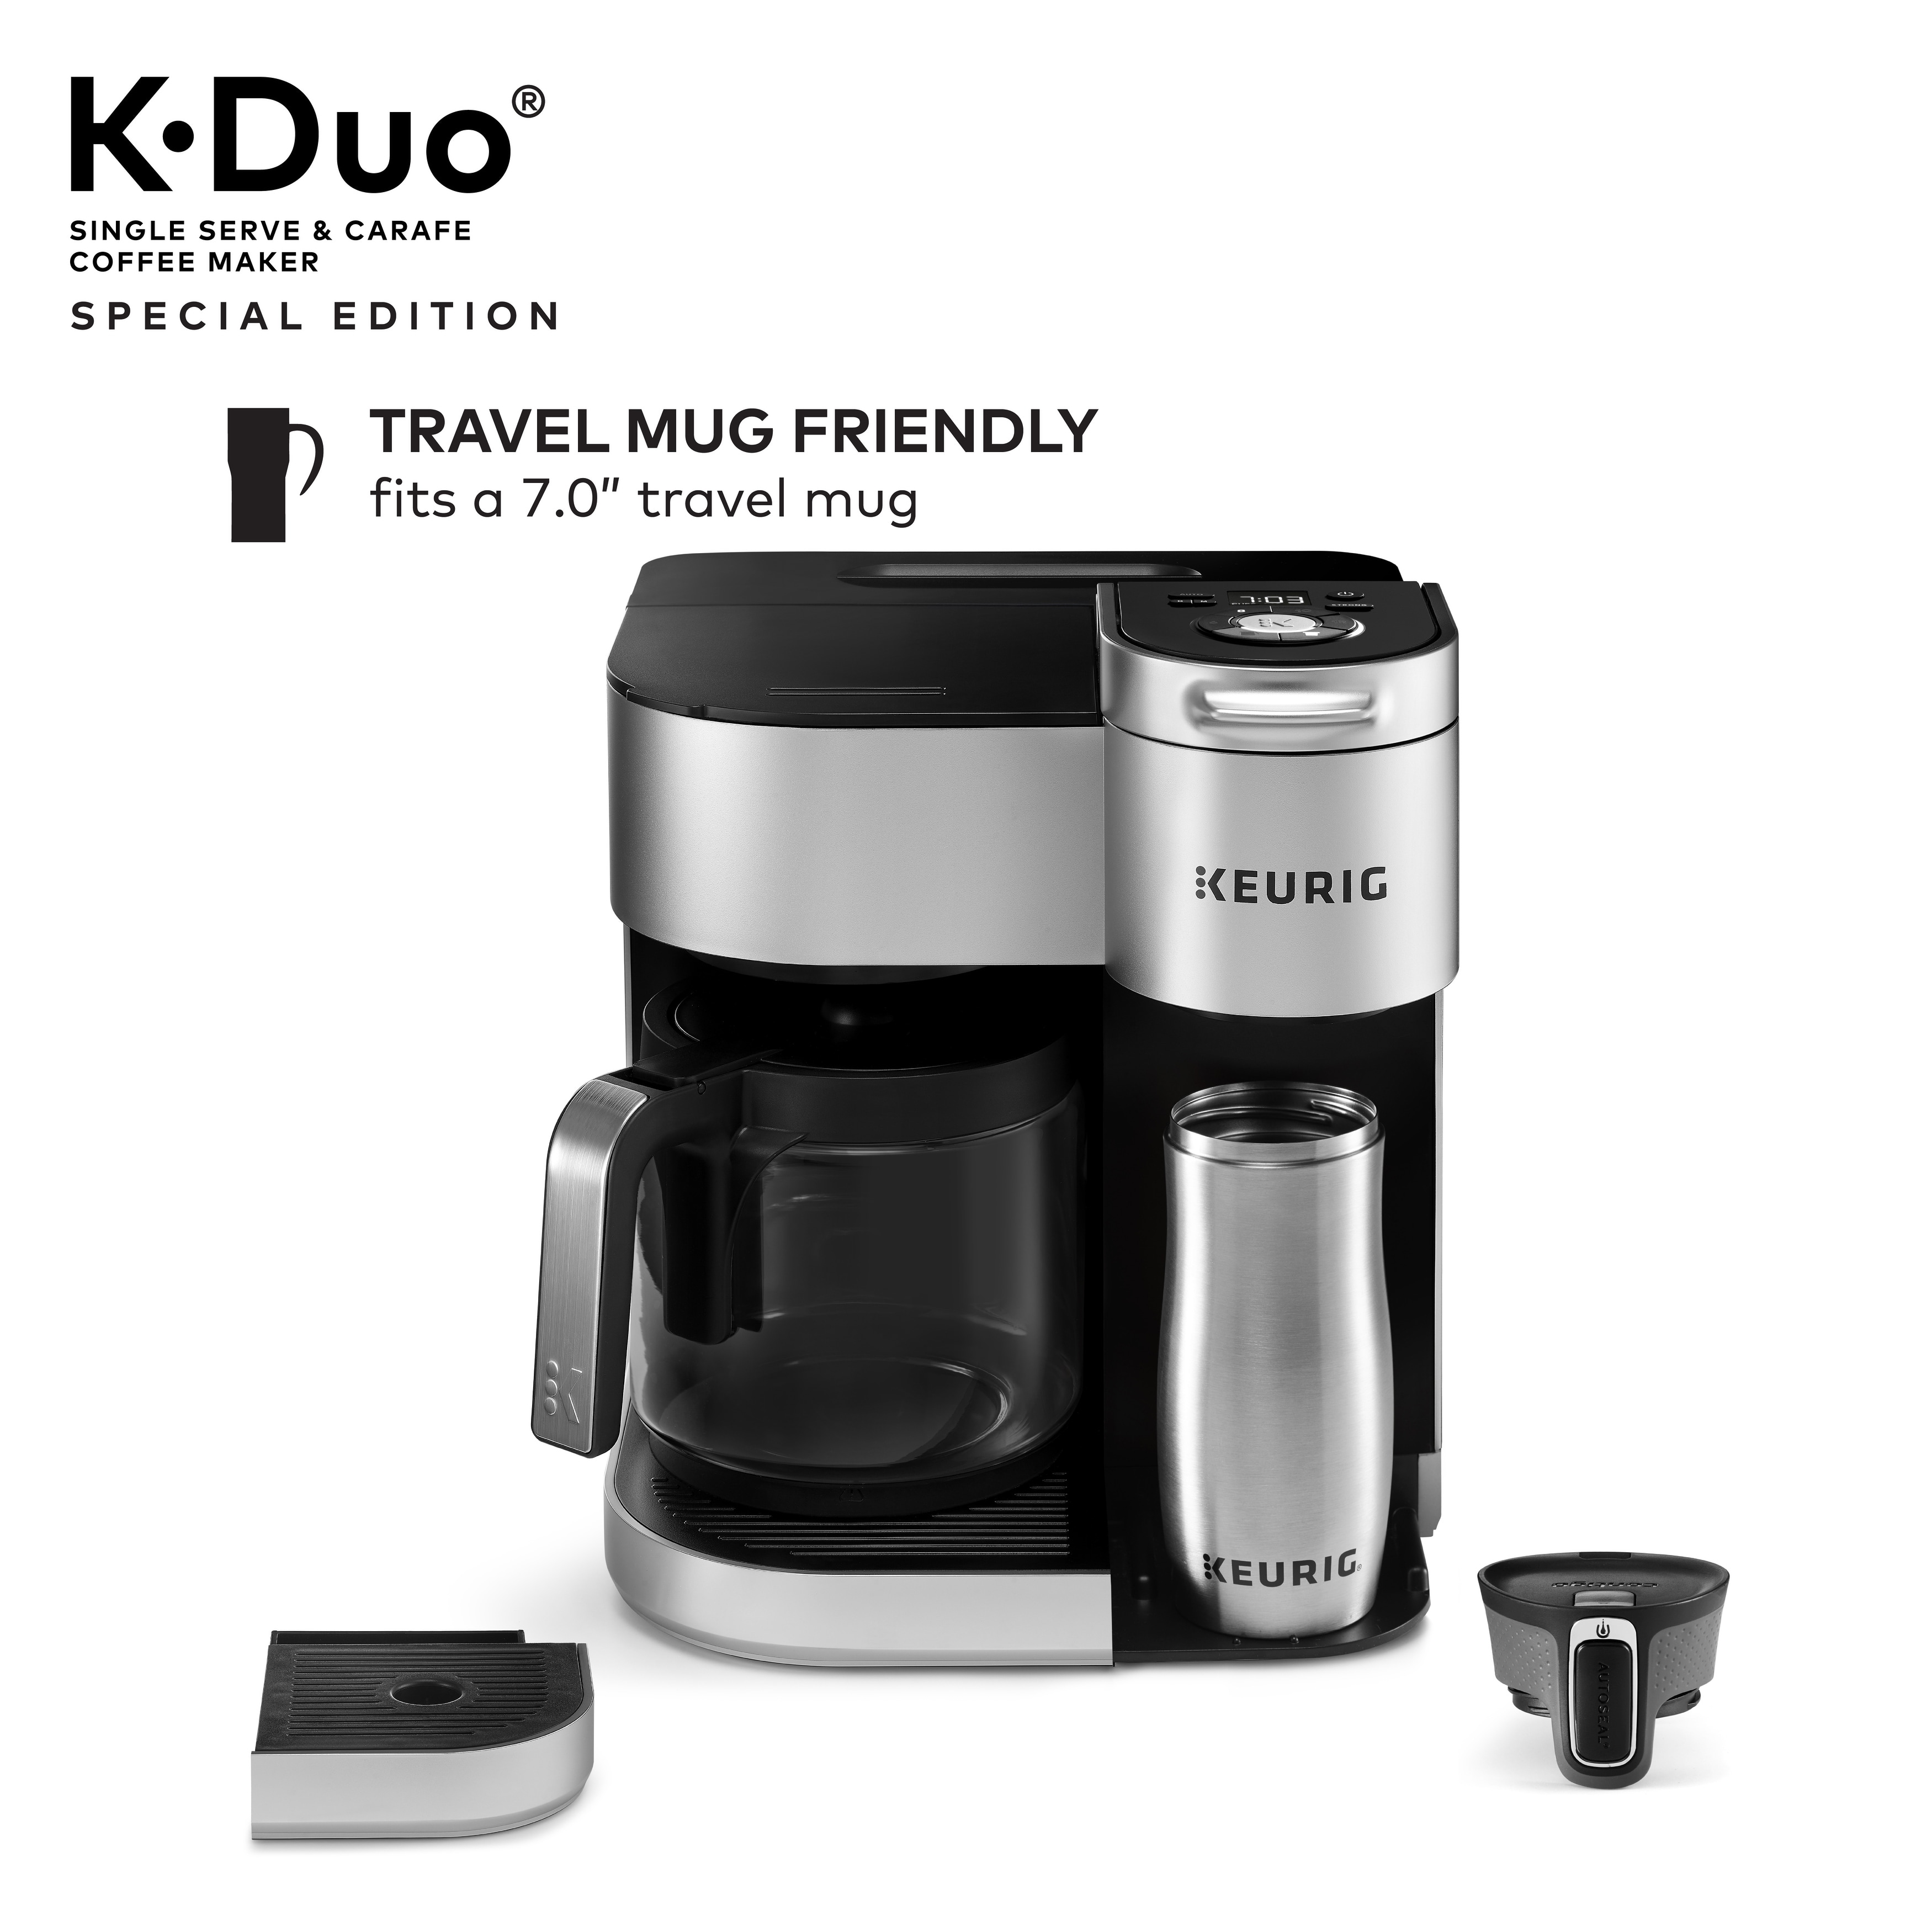 https://ak1.ostkcdn.com/images/products/is/images/direct/55392ea54a007d3a267a9353380f30f5fe7d9b2f/Keurig%C2%AE-K-Duo%C2%AE-Special-Edition-Single-Serve-%26-Carafe-Coffee-Maker.jpg